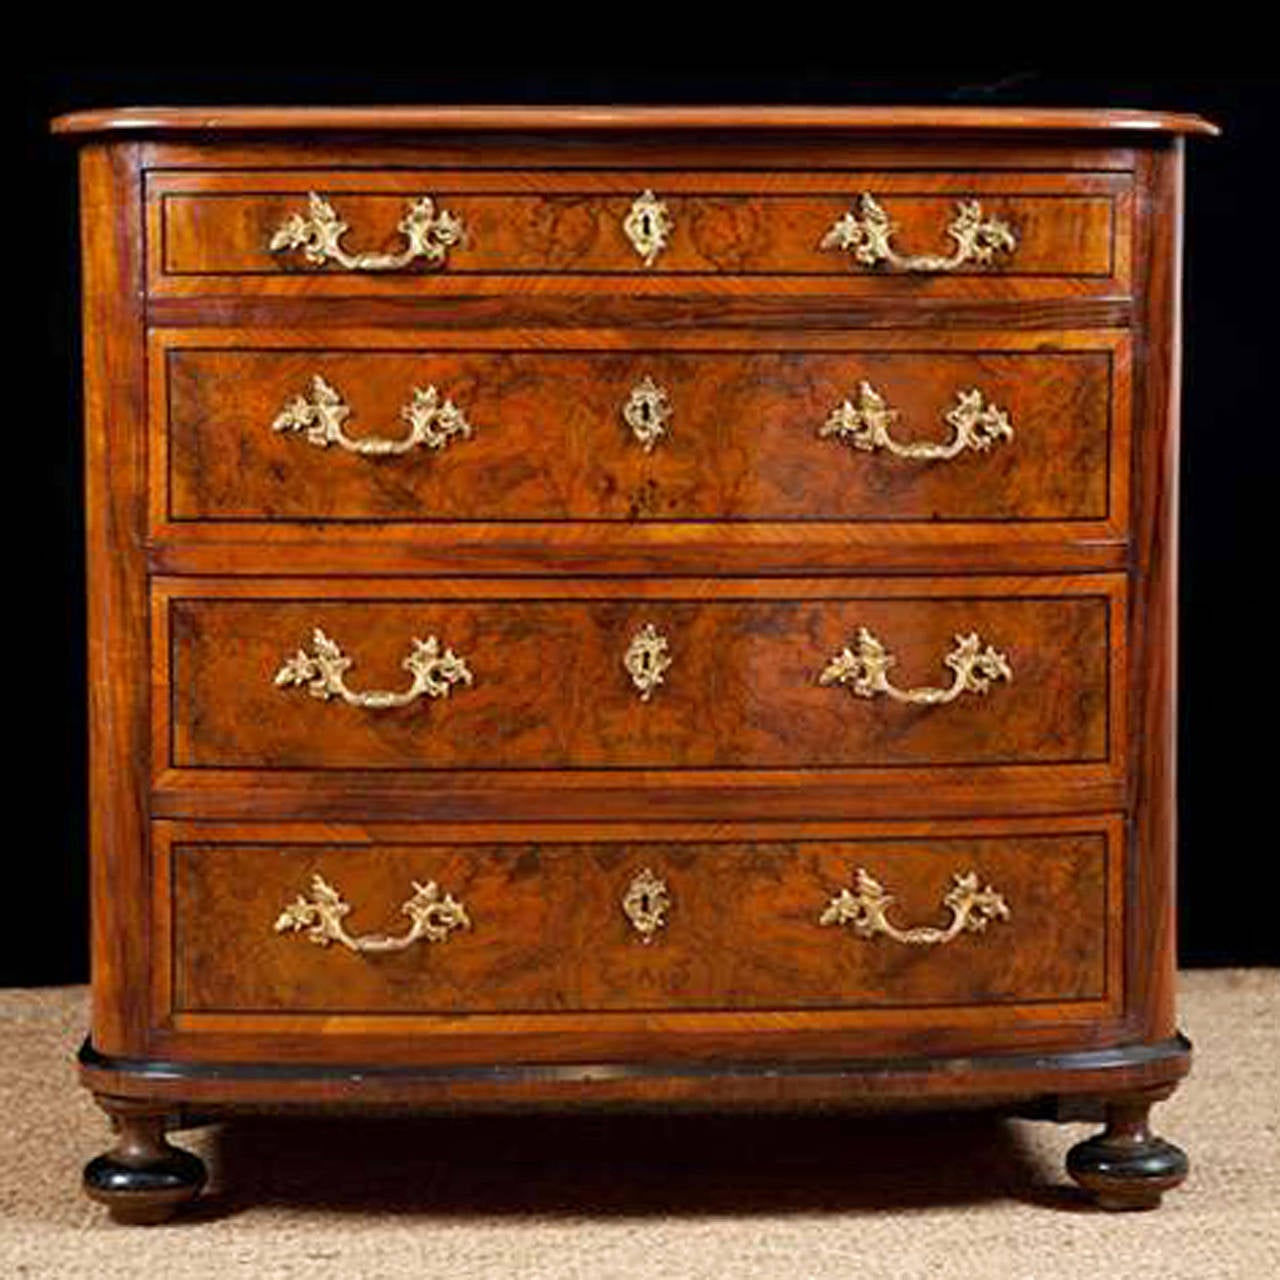 A handsome chest of drawers in walnut with panels in burled walnut and ebonized details throughout. Chest rests on original turned front feet and square back feet and features a bowed front with four storage drawers, offering a shallower one at the